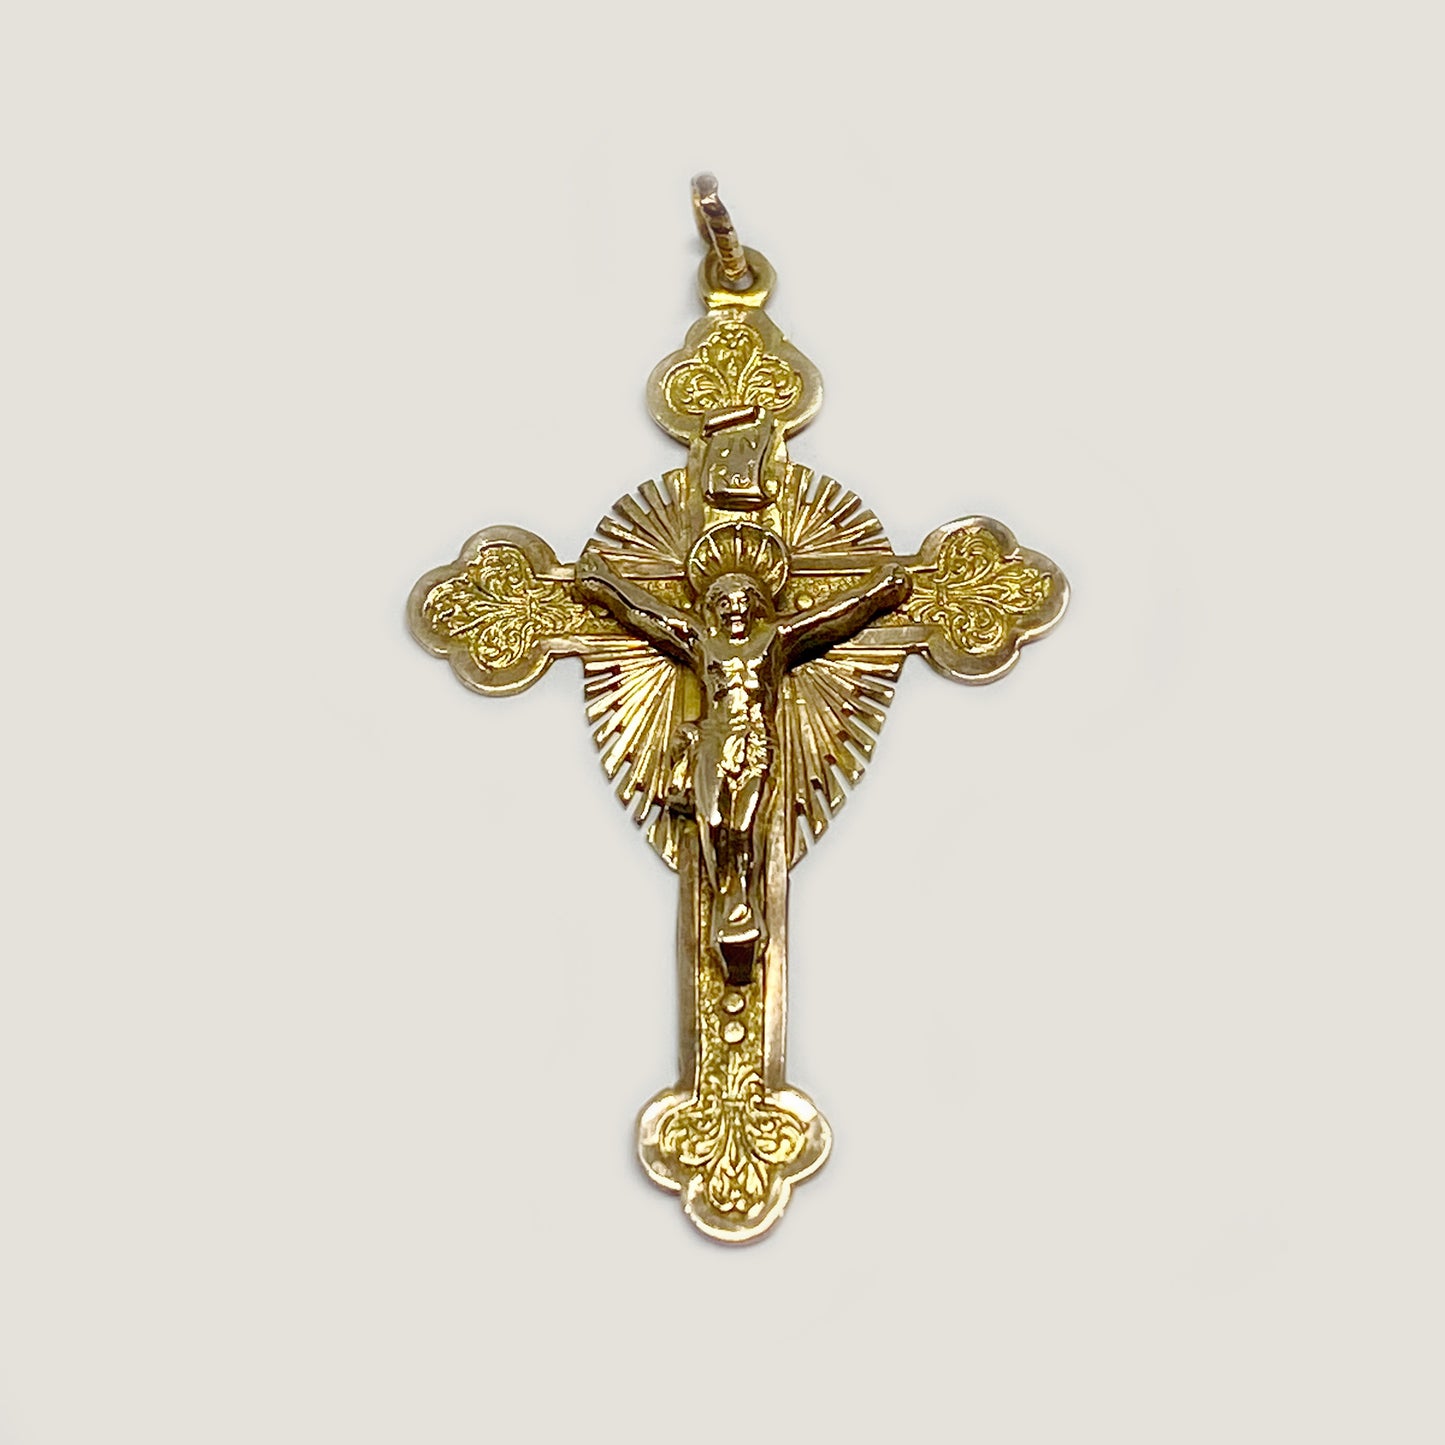 Antique 14k Gold Solid Victorian Cross - 1800s